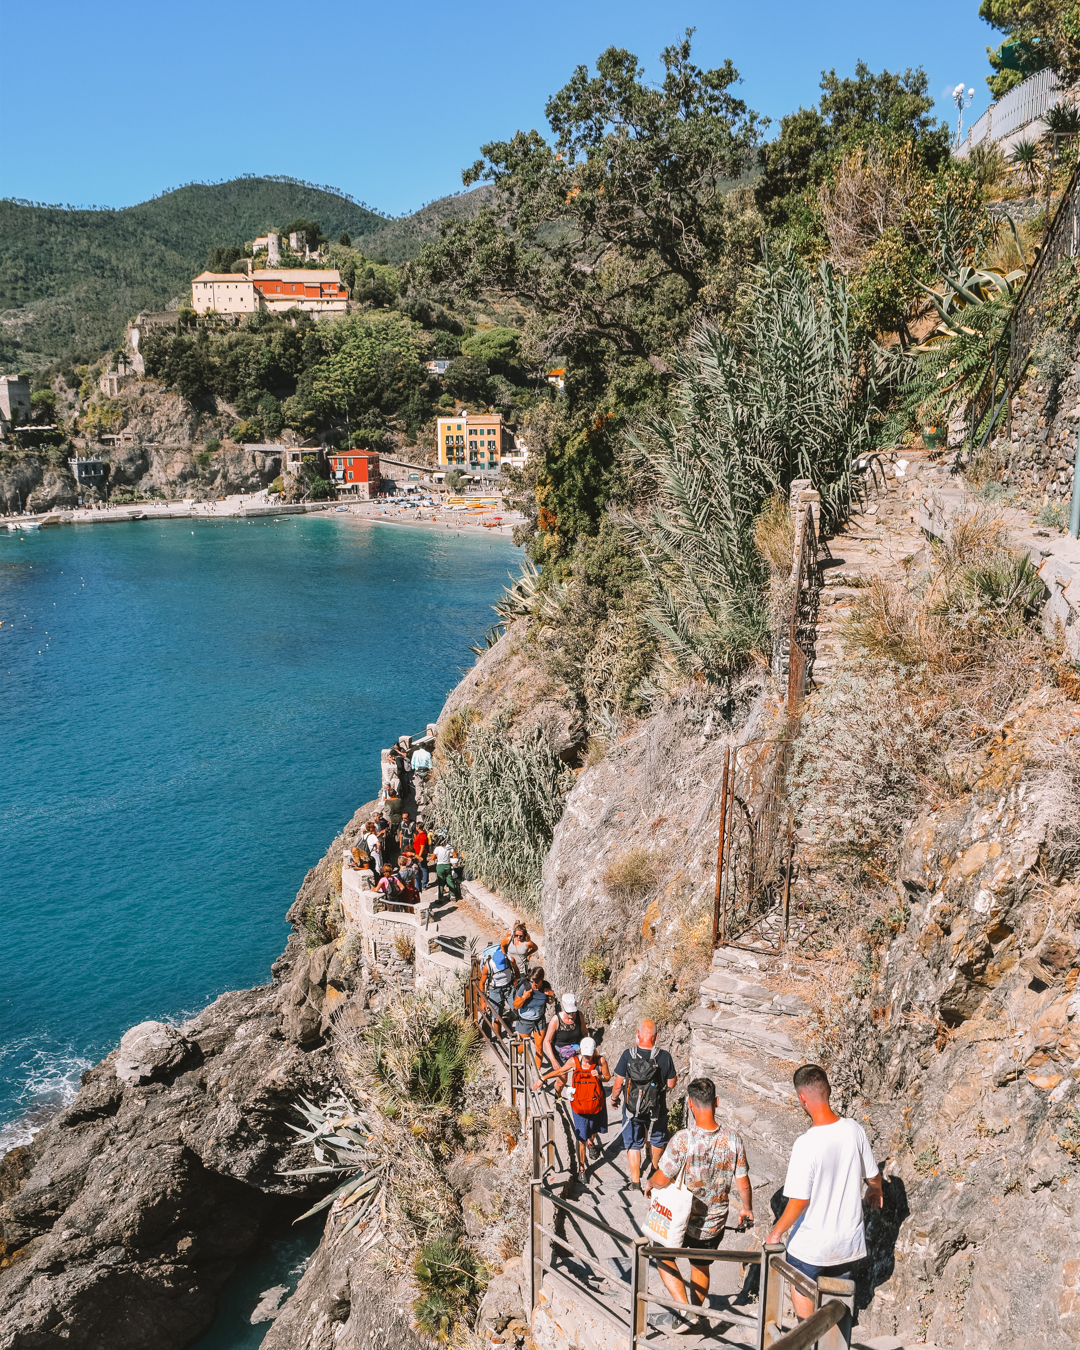 Hiking between the Cinque Terre towns